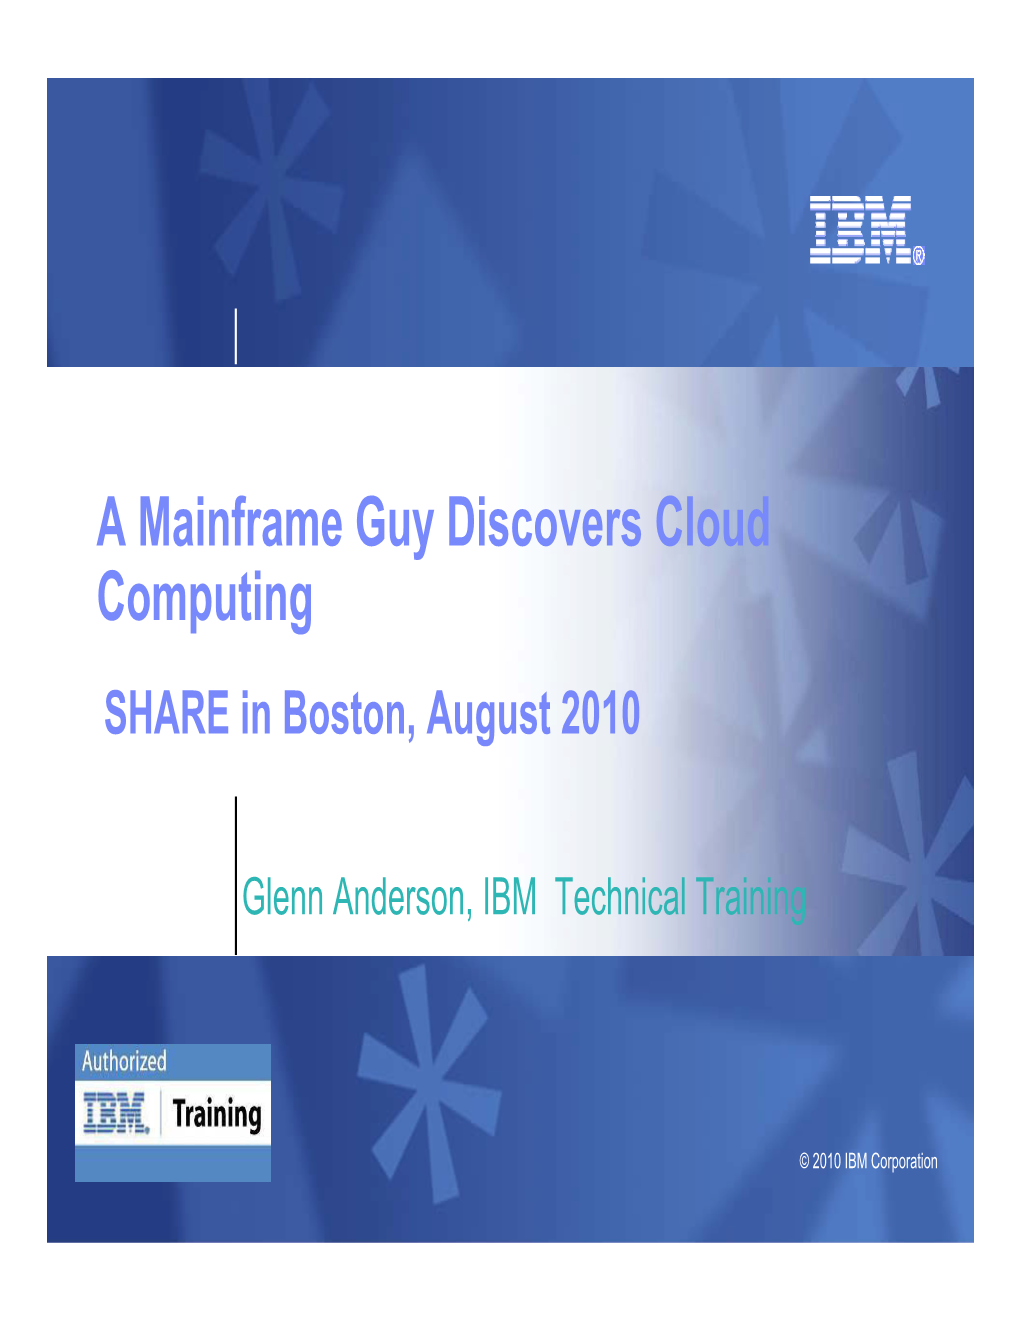 A Mainframe Guy Discovers Cloud Computing SHARE in Boston, August 2010